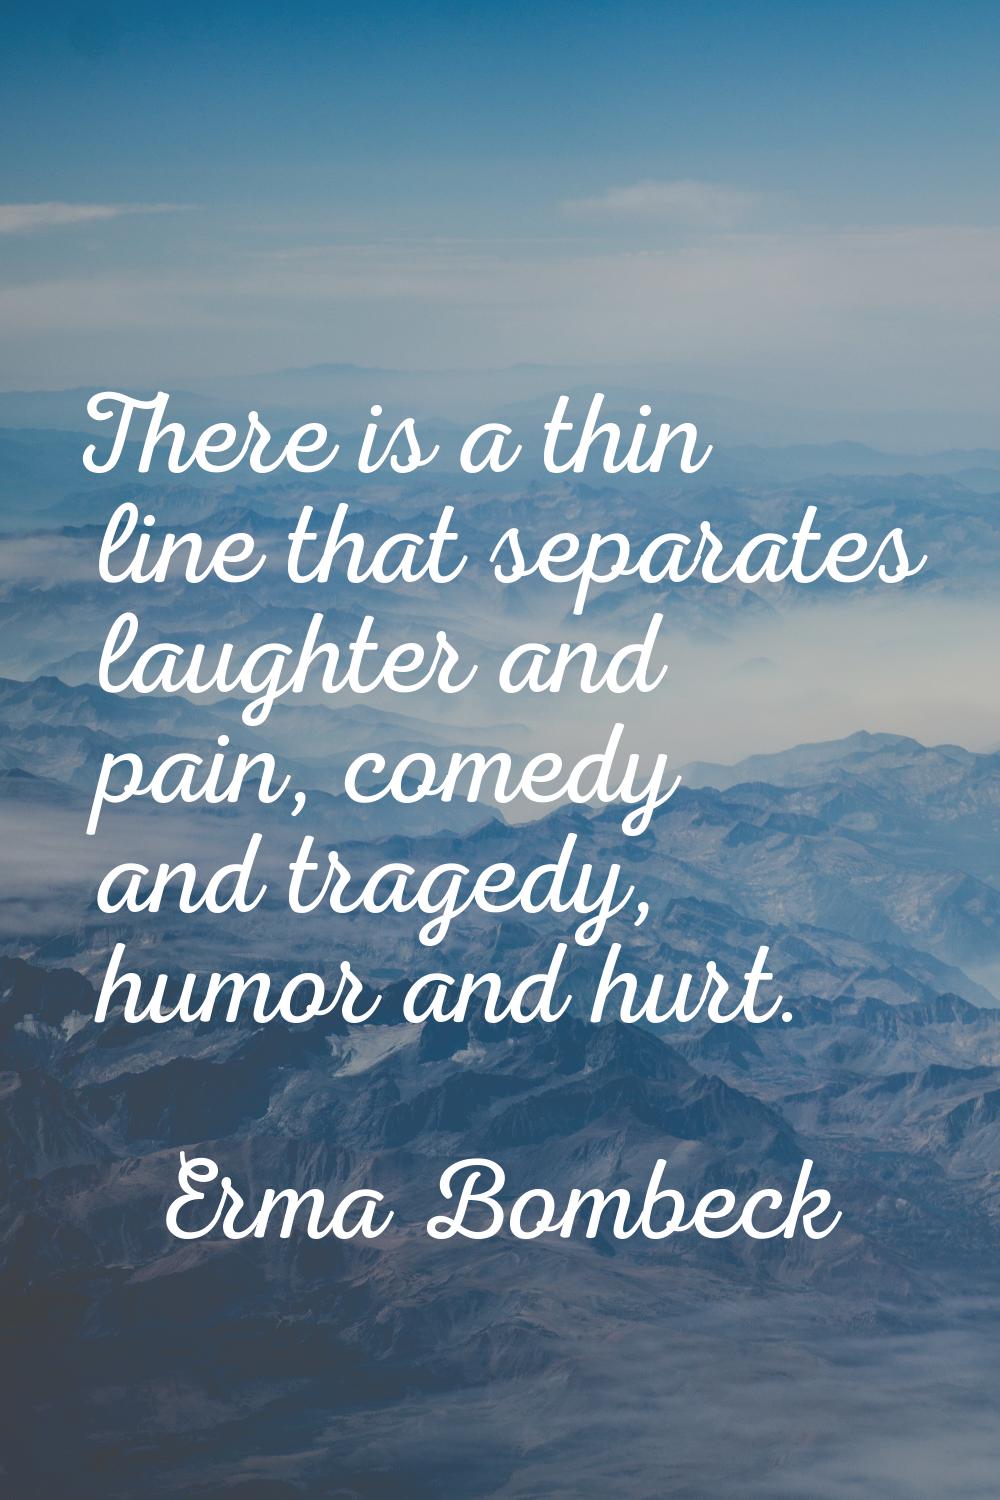 There is a thin line that separates laughter and pain, comedy and tragedy, humor and hurt.